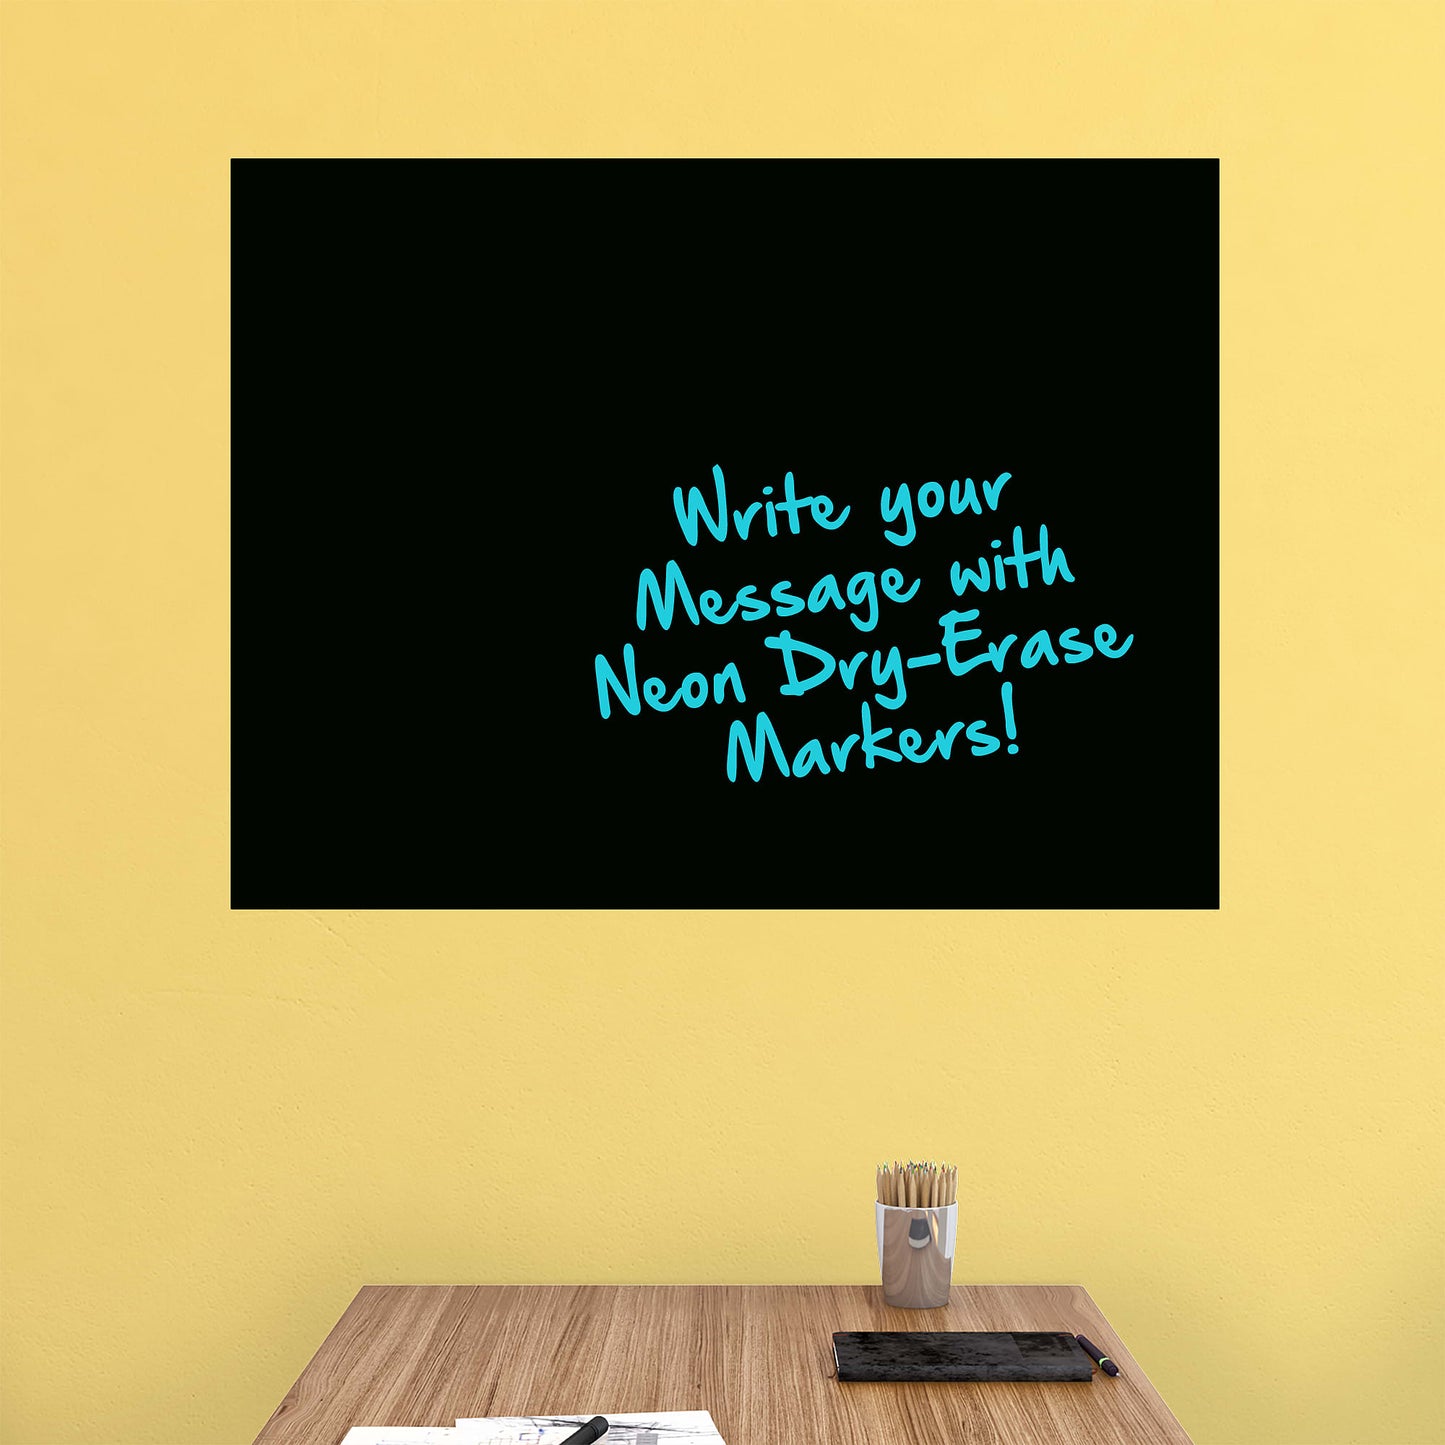 Black Dry Erase Board Removable Wall Decal